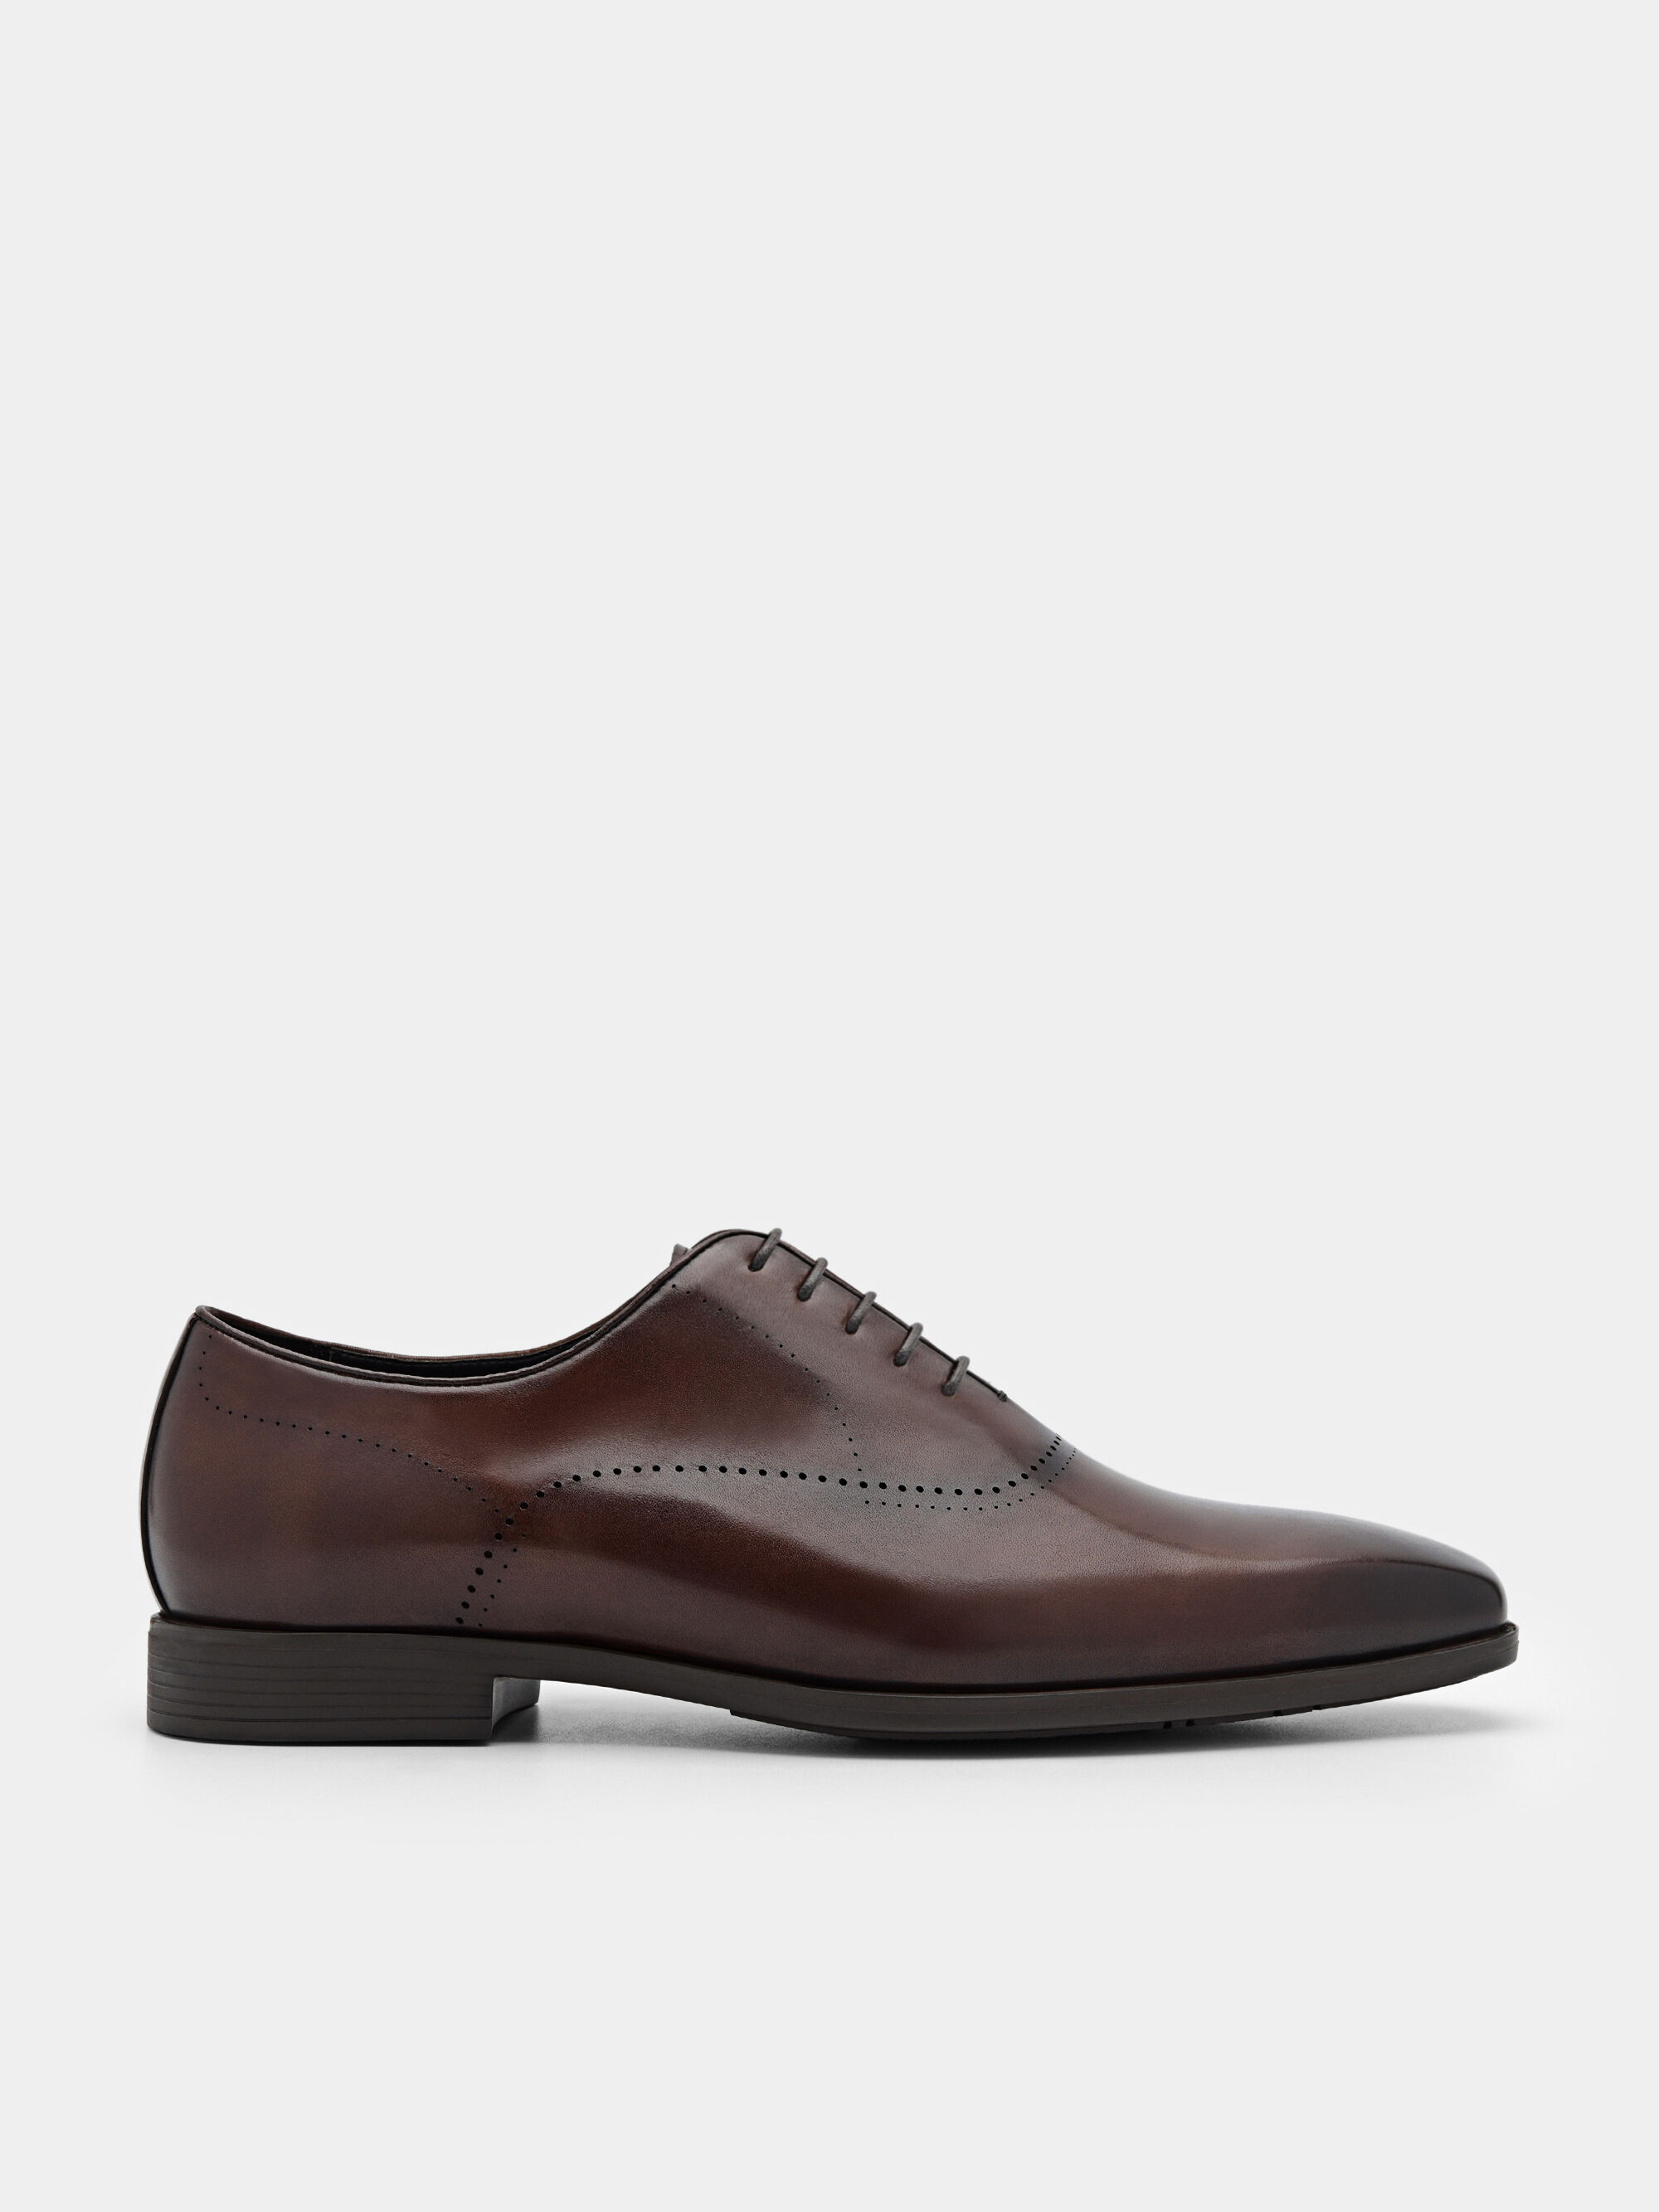 Brown Altitude Lightweight Leather Oxford Shoes - PEDRO SG